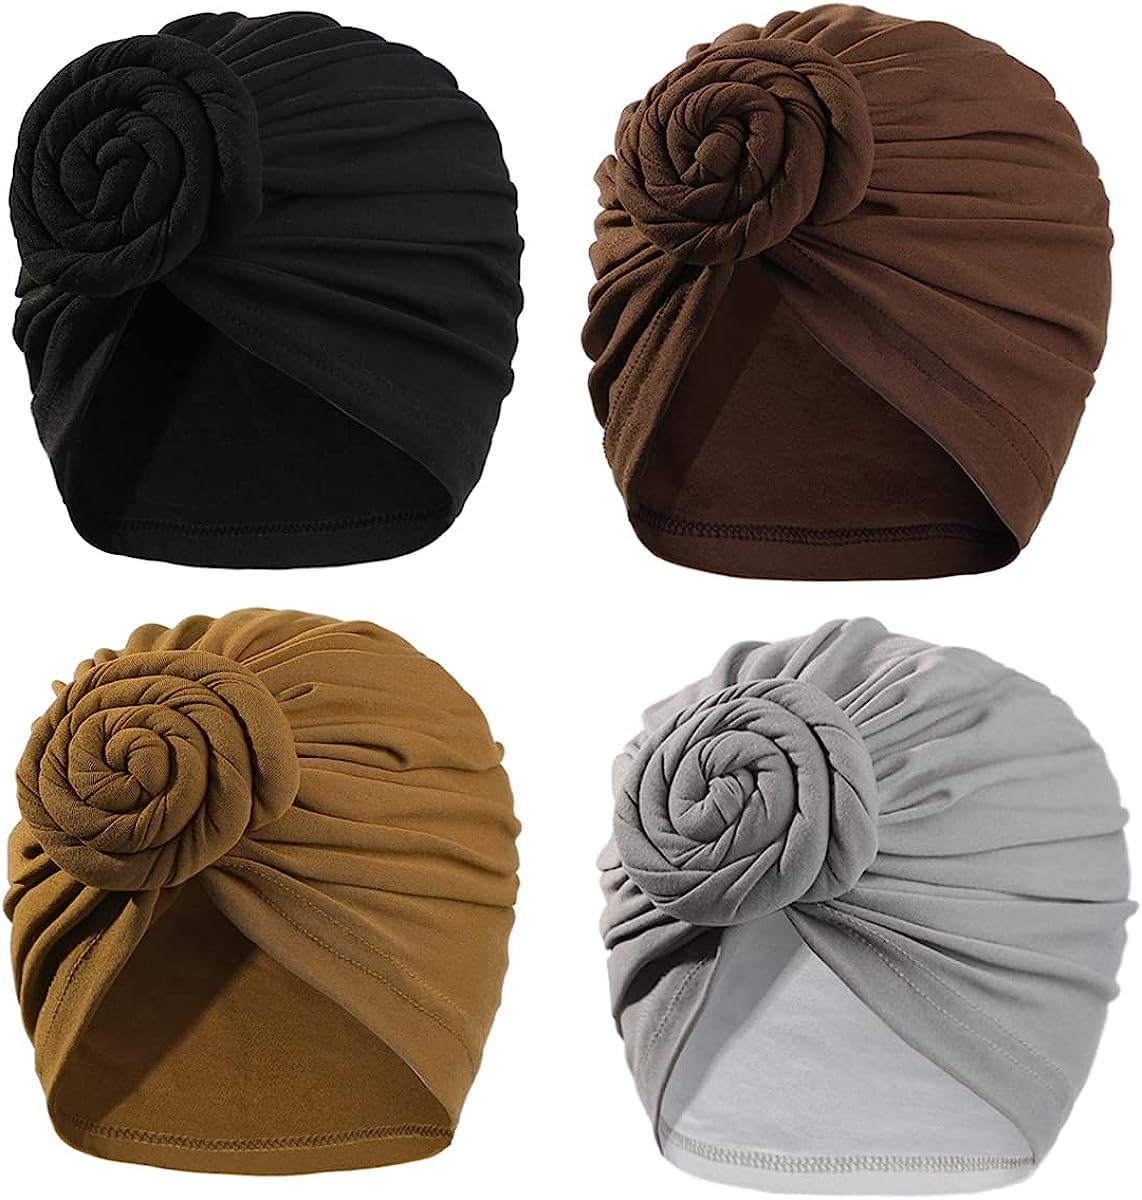 Stretch Turban Hats for Women African Knot Headwraps Soft Pre Tied Bonnet 